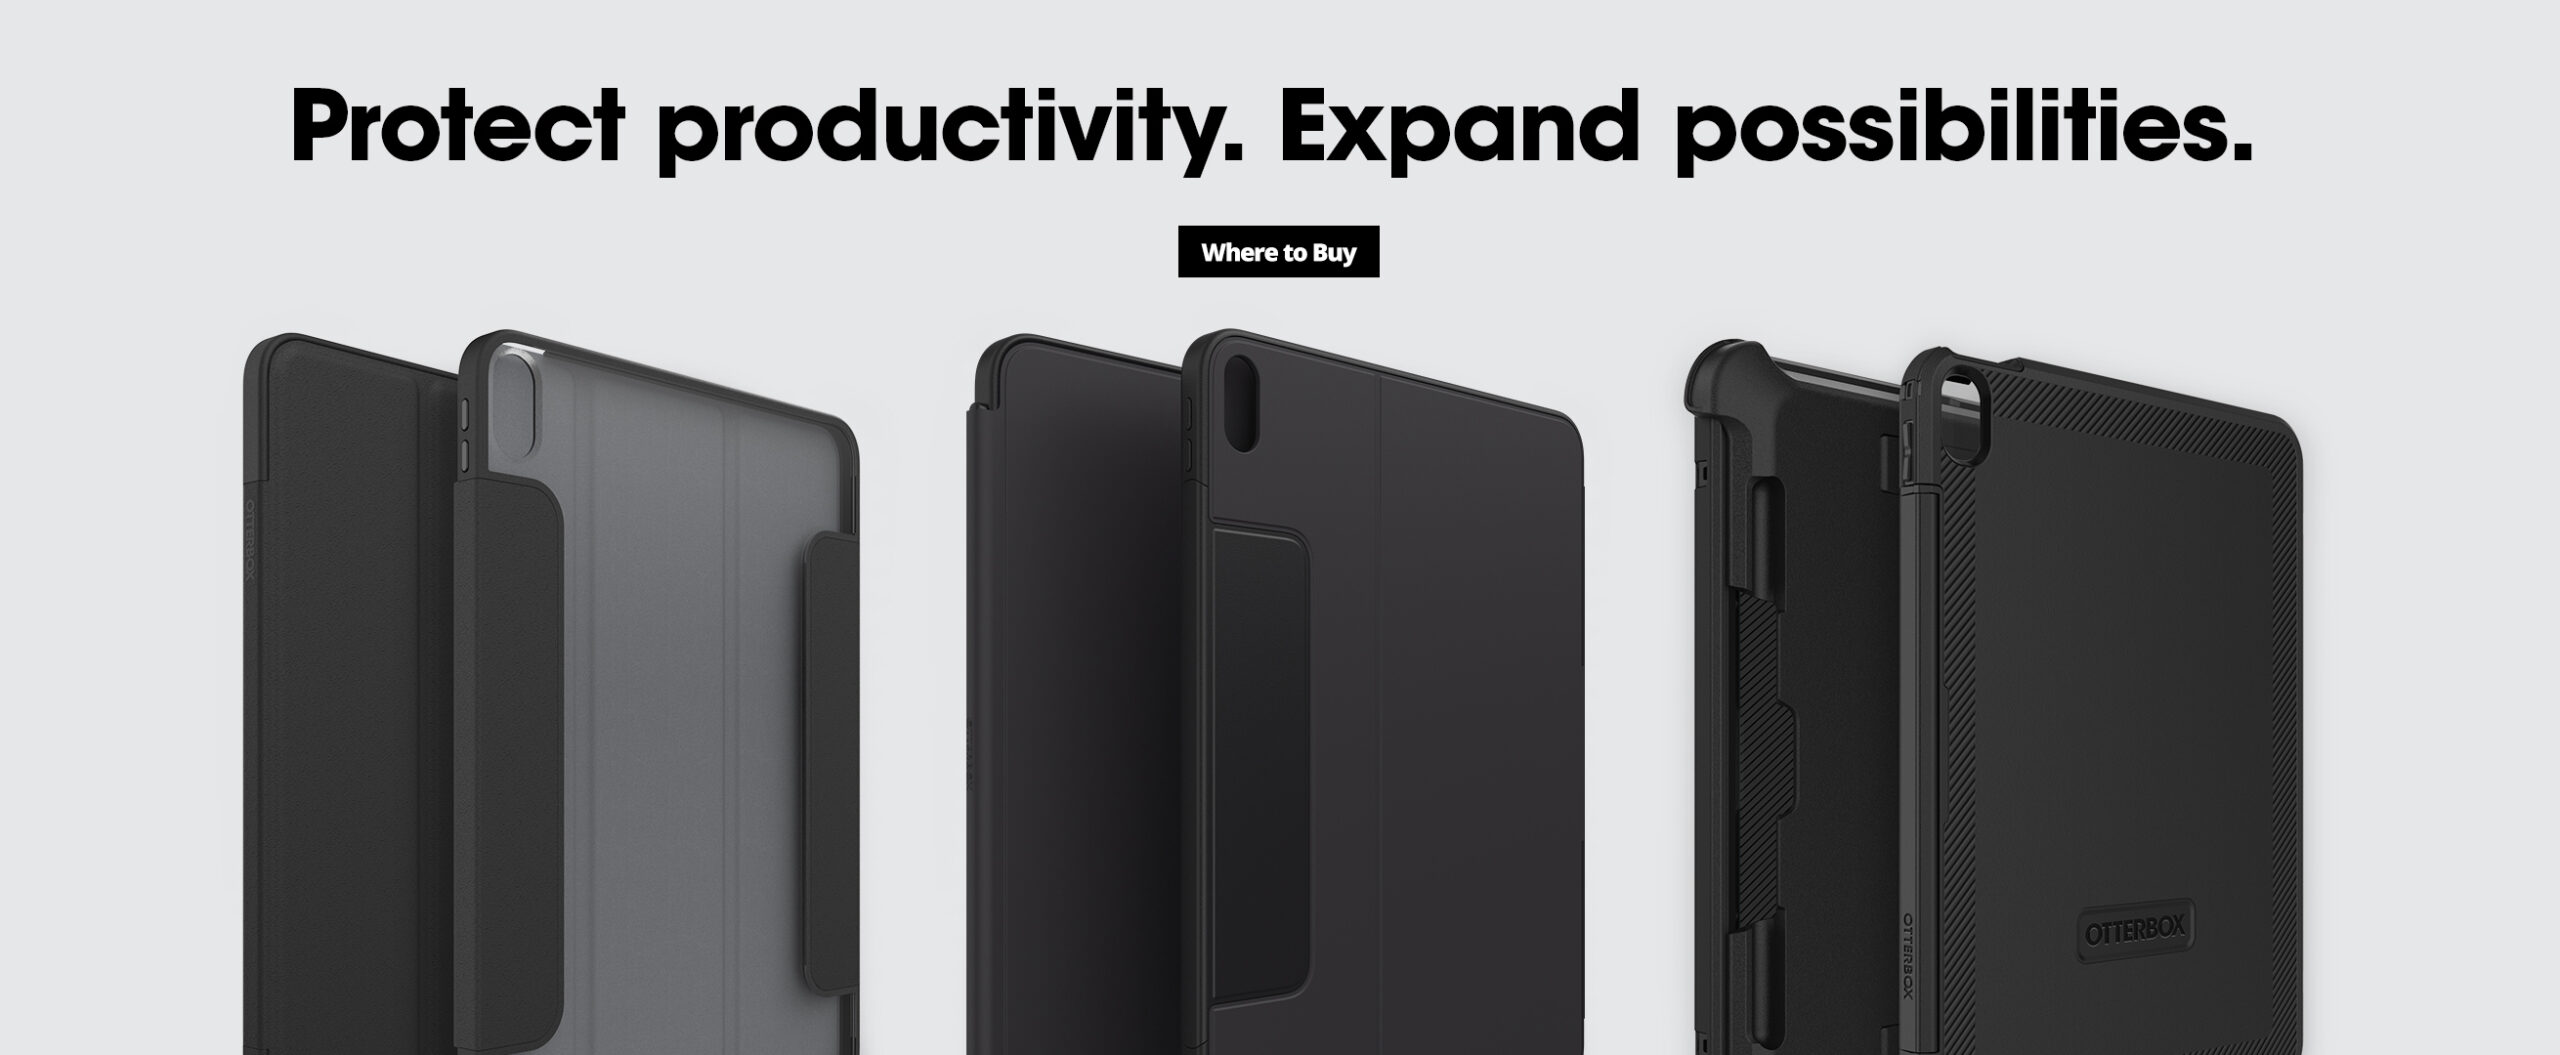 Protect productivity. Expand possibilities.